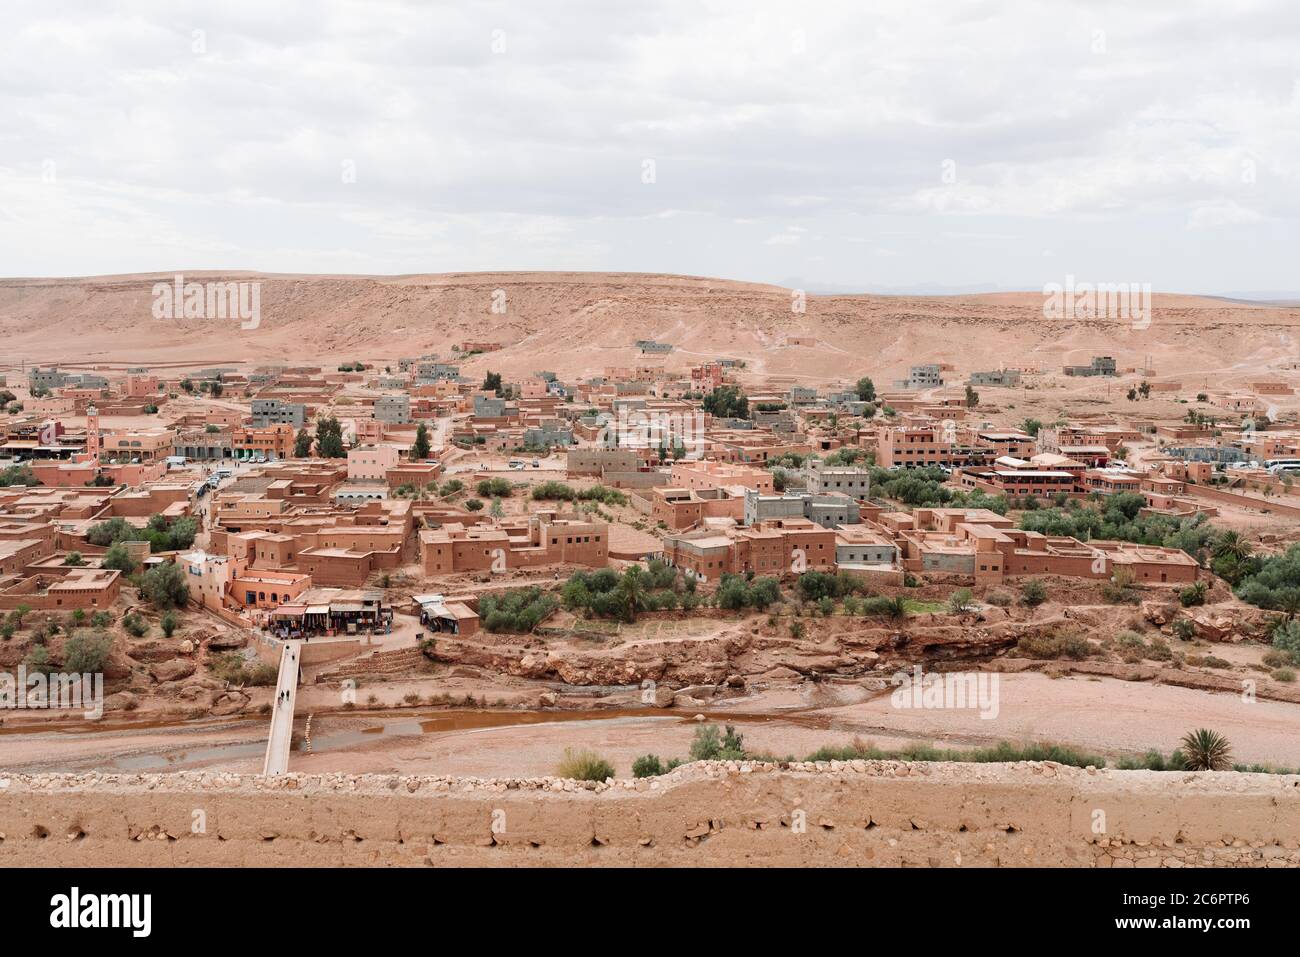 Red Sandstone Buildings in the desert next to Ait Benhaddou filming location, Morocco Stock Photo